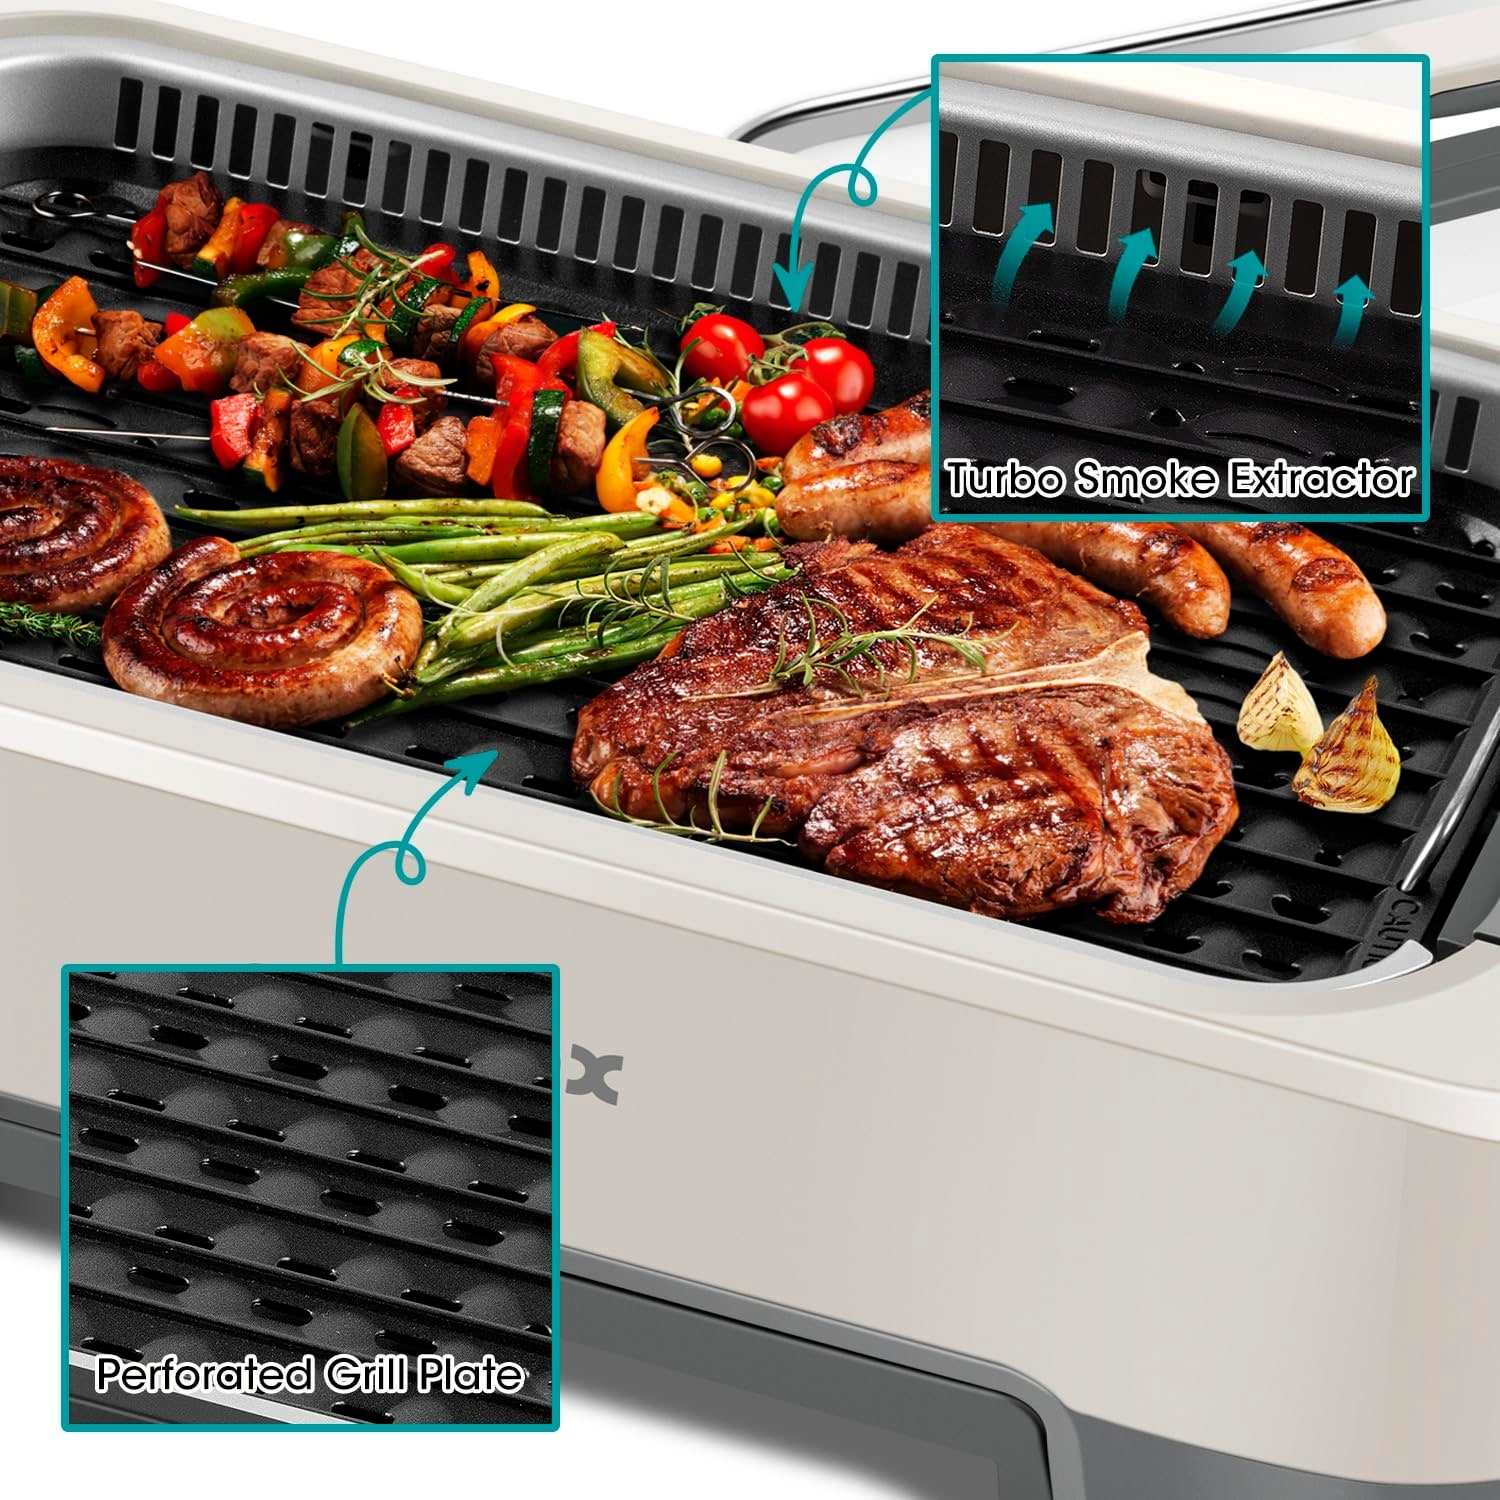 Smokeless Grill Indoor Electric Grill 1500W Indoor Grill Portable Korean BBQ